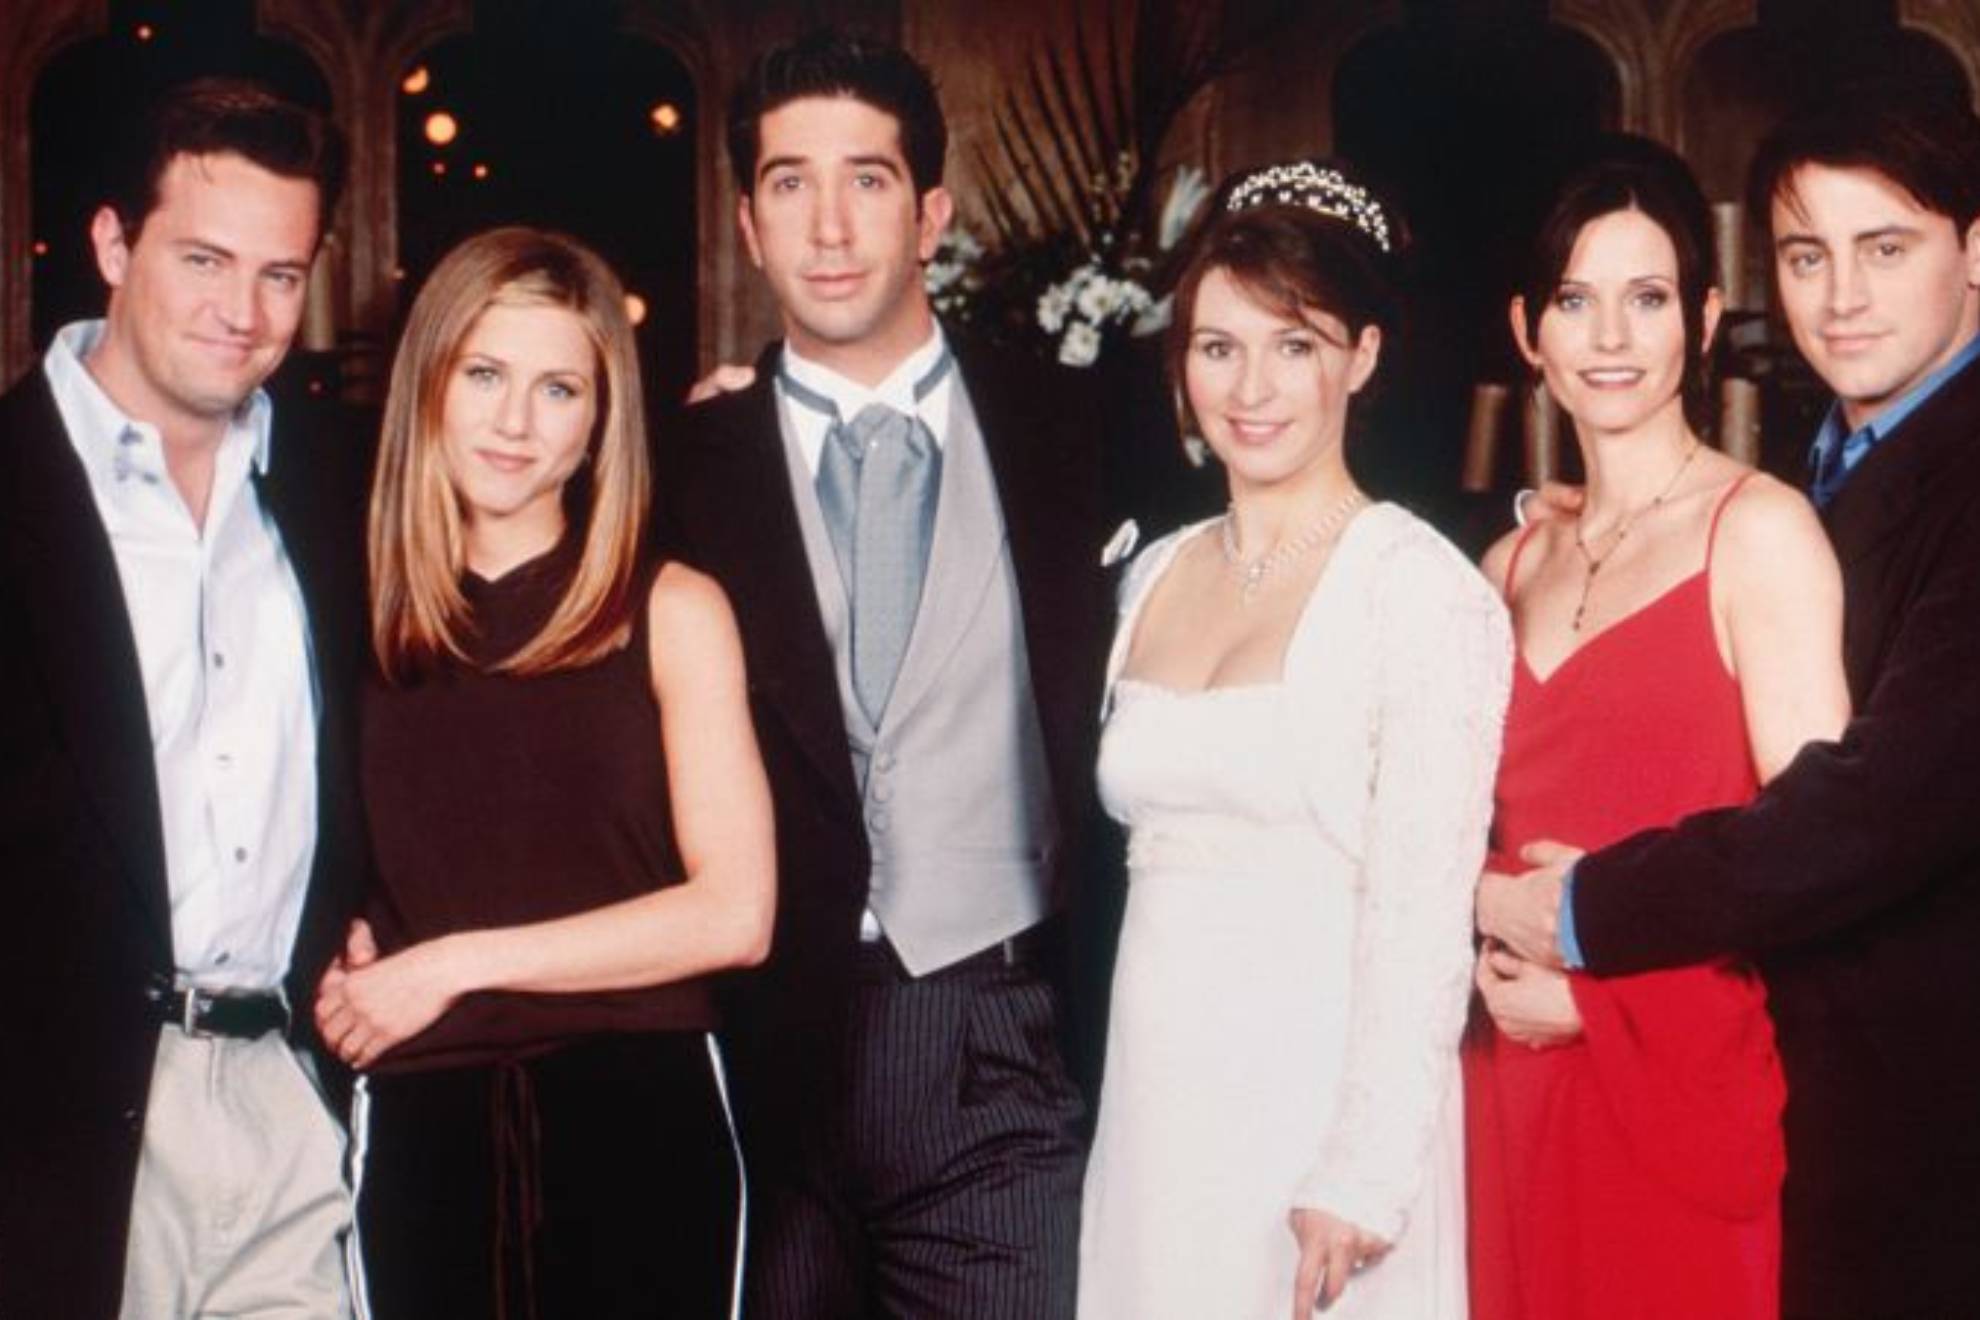 'Friends' director reveals true reason why one character was written off: She wasn't funny